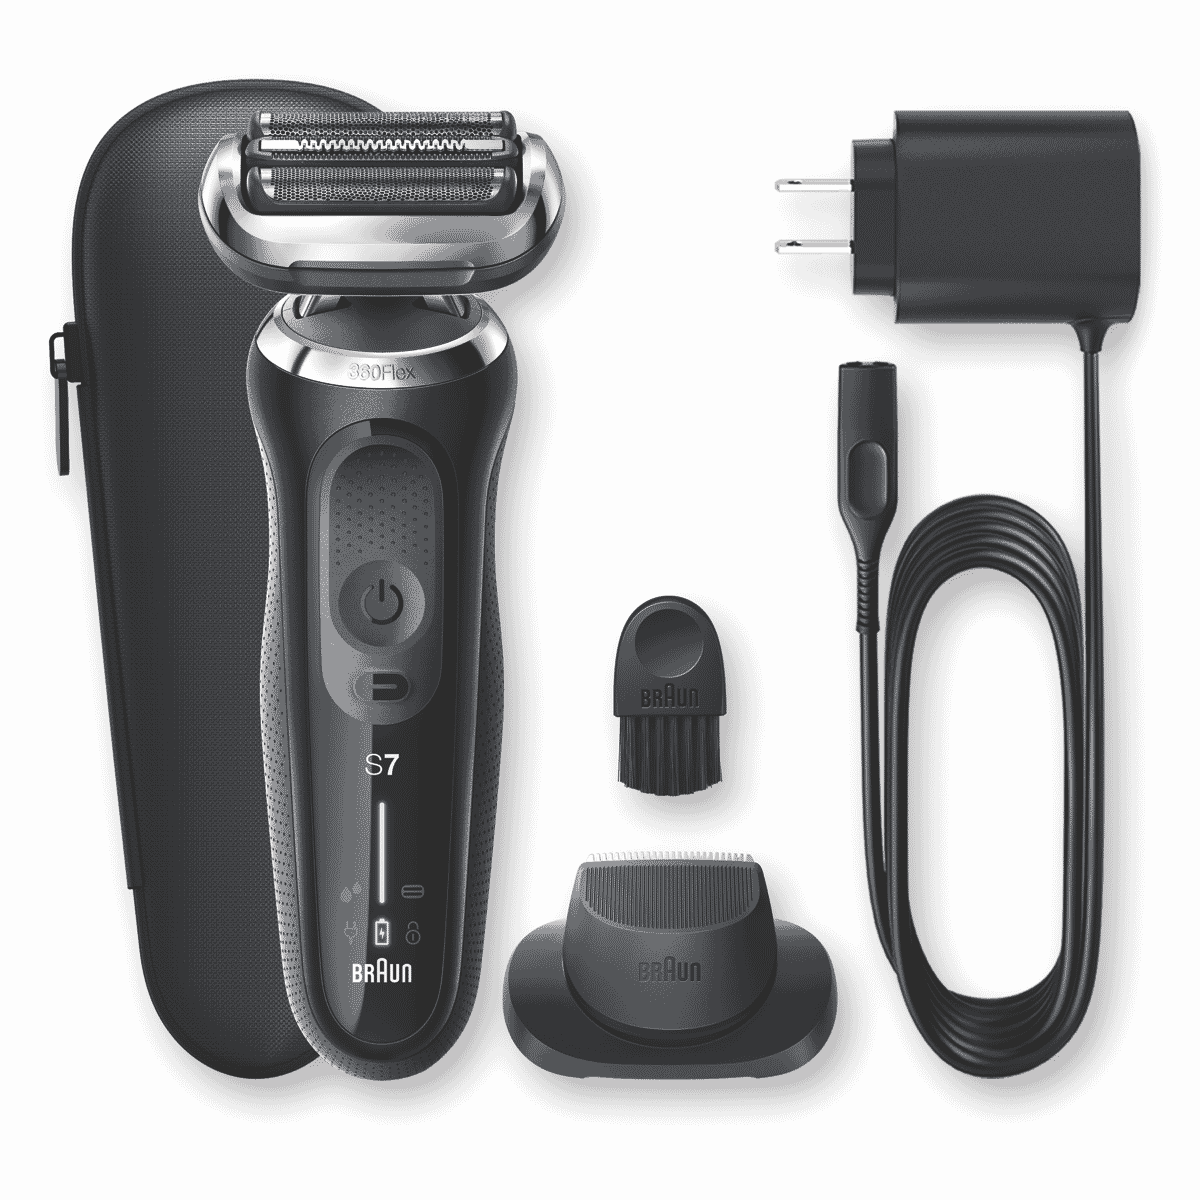 Braun 71-N1200S Series 7 Wet And Dry Shaver at The Good Guys